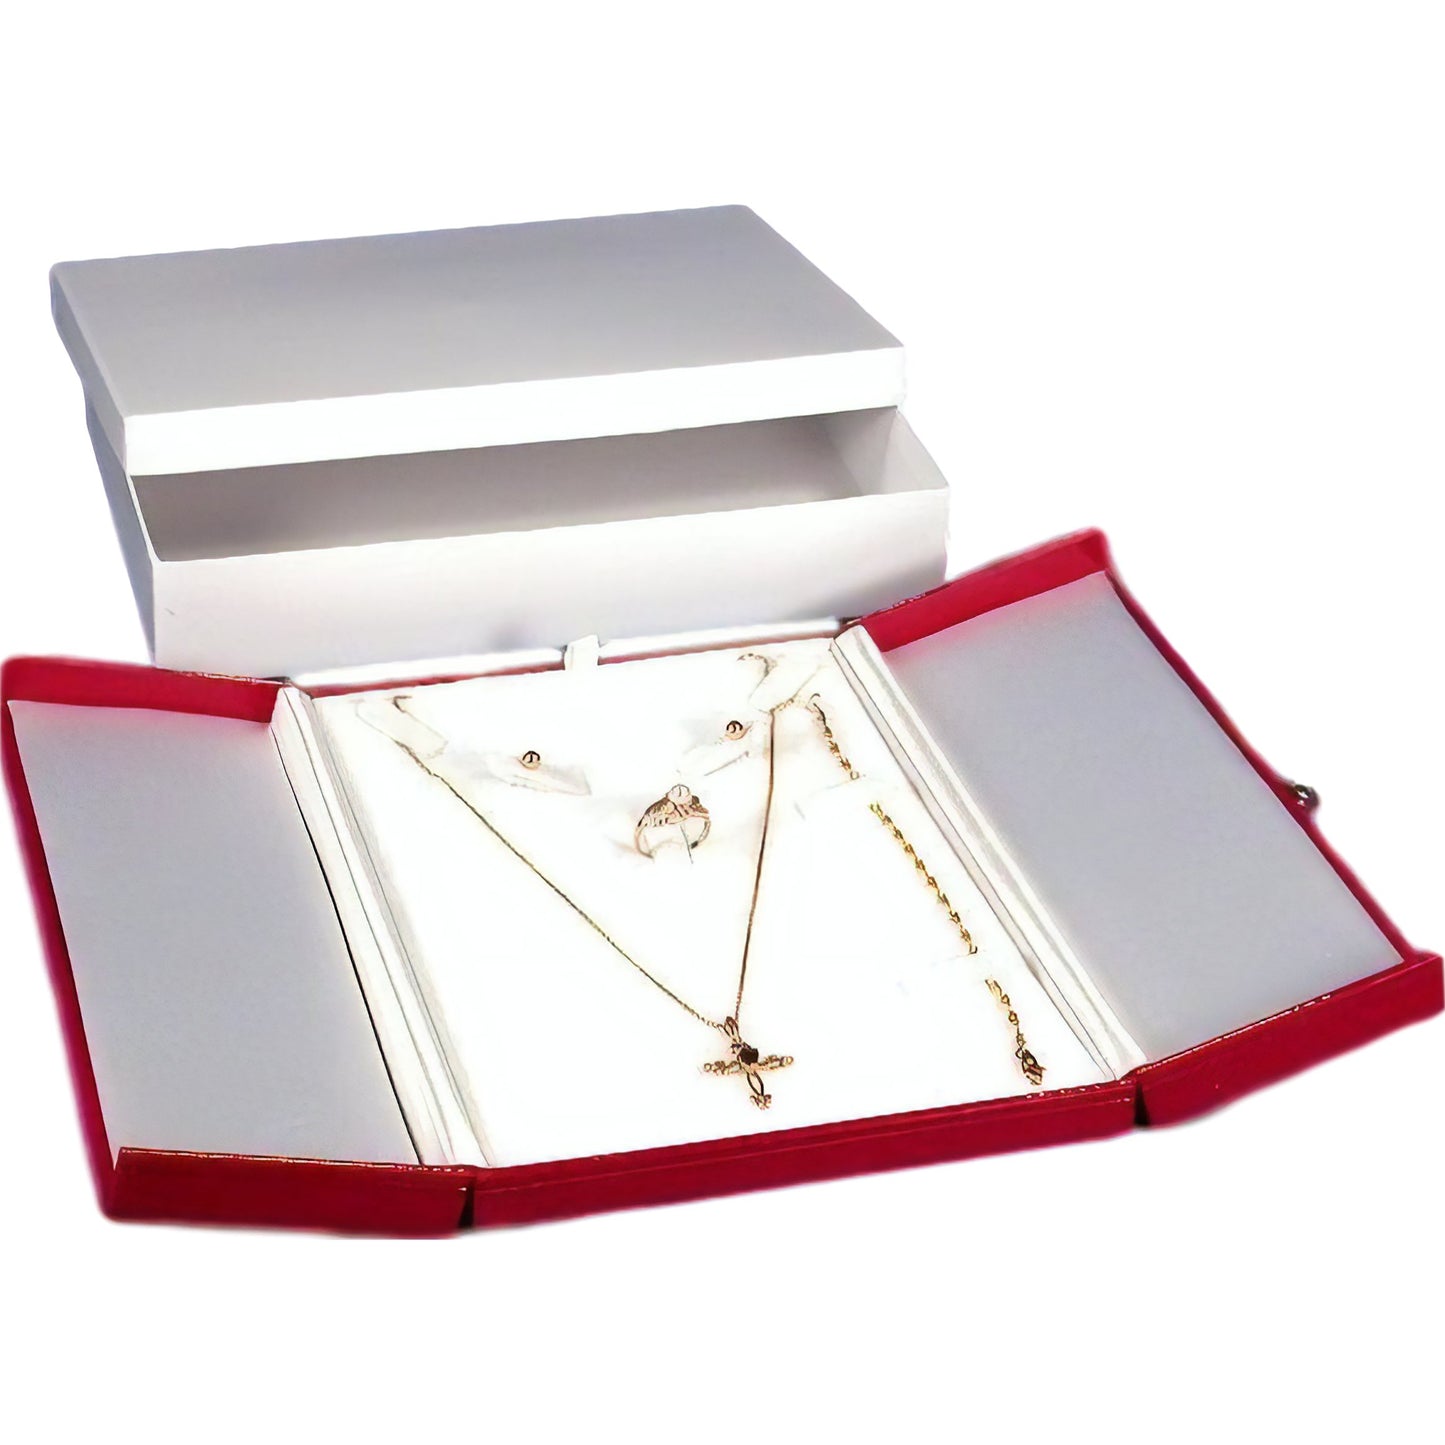 3 Red Jewelry Combination Snap Lid Gift Boxes